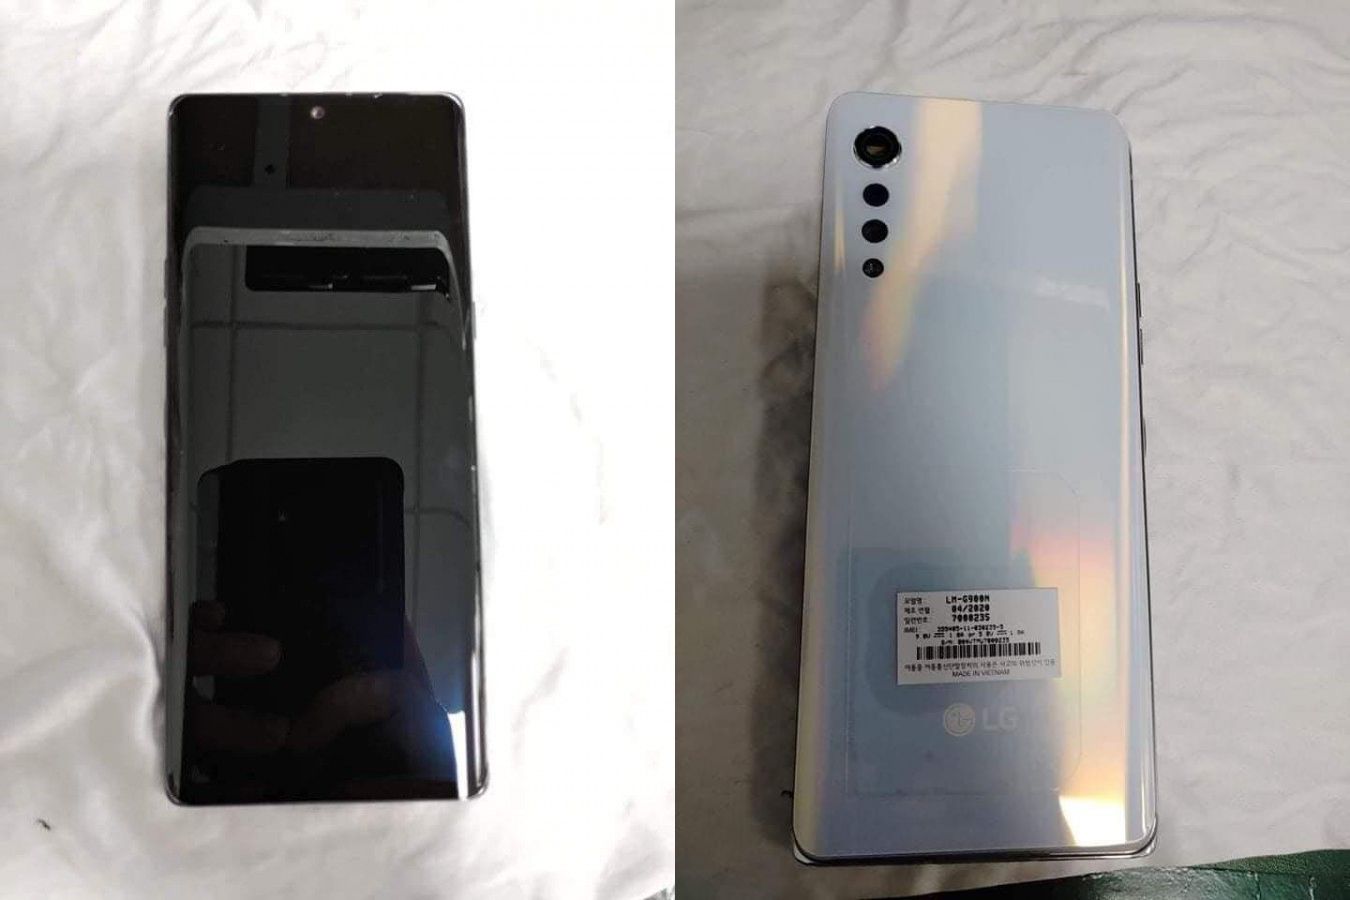 LG VELVET live shots appear to showcase its design in real